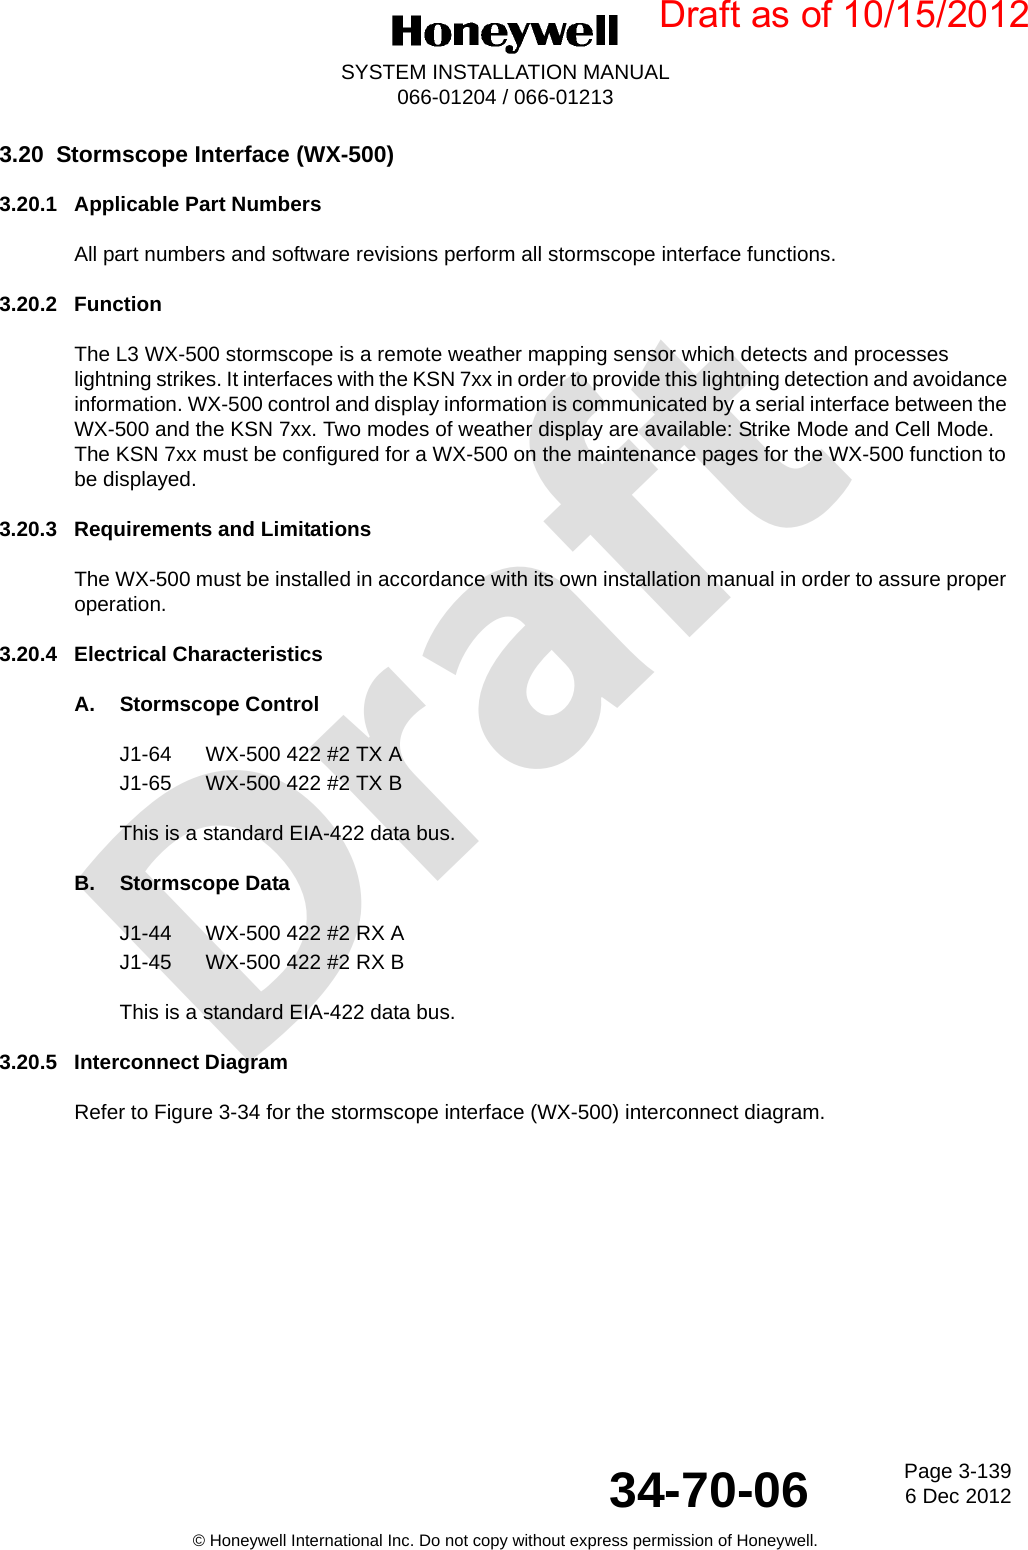 DraftPage 3-1396 Dec 201234-70-06SYSTEM INSTALLATION MANUAL066-01204 / 066-01213© Honeywell International Inc. Do not copy without express permission of Honeywell.3.20 Stormscope Interface (WX-500)3.20.1 Applicable Part NumbersAll part numbers and software revisions perform all stormscope interface functions.3.20.2 FunctionThe L3 WX-500 stormscope is a remote weather mapping sensor which detects and processes lightning strikes. It interfaces with the KSN 7xx in order to provide this lightning detection and avoidance information. WX-500 control and display information is communicated by a serial interface between the WX-500 and the KSN 7xx. Two modes of weather display are available: Strike Mode and Cell Mode. The KSN 7xx must be configured for a WX-500 on the maintenance pages for the WX-500 function to be displayed.3.20.3 Requirements and LimitationsThe WX-500 must be installed in accordance with its own installation manual in order to assure proper operation.3.20.4 Electrical CharacteristicsA. Stormscope ControlJ1-64 WX-500 422 #2 TX AJ1-65 WX-500 422 #2 TX BThis is a standard EIA-422 data bus.B. Stormscope DataJ1-44 WX-500 422 #2 RX AJ1-45 WX-500 422 #2 RX BThis is a standard EIA-422 data bus.3.20.5 Interconnect DiagramRefer to Figure 3-34 for the stormscope interface (WX-500) interconnect diagram.Draft as of 10/15/2012